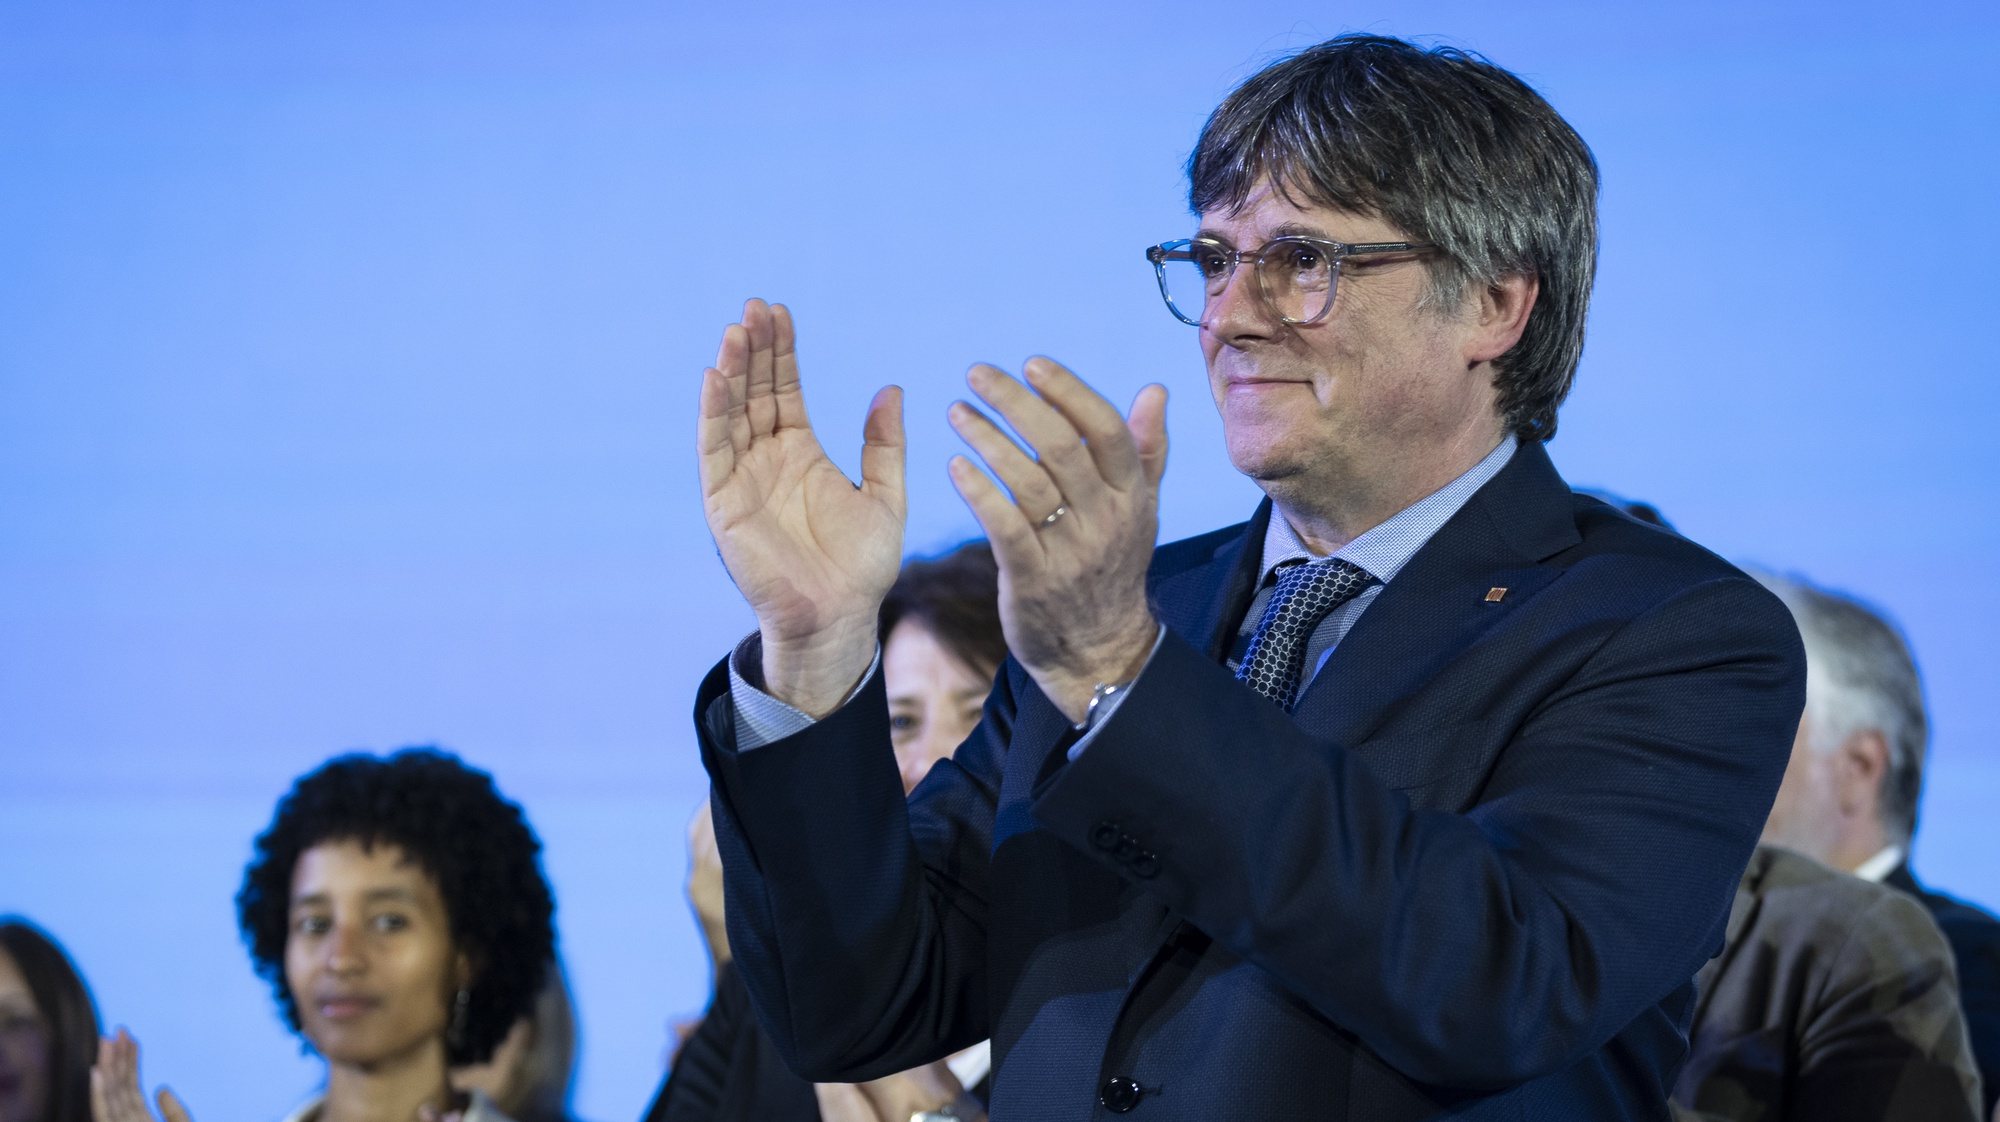 epa11336193 Catalonian JxCat party candidate Carles Puigdemont delivers a press conference during the Catalonia regional election, in Argeles-sur-Mer, France, 12 May 2024. Catalonia holds regional elections on 12 May in which Catalans are called to elect the 15th Parliament of the autonomous community of Catalonia.  EPA/David Borrat